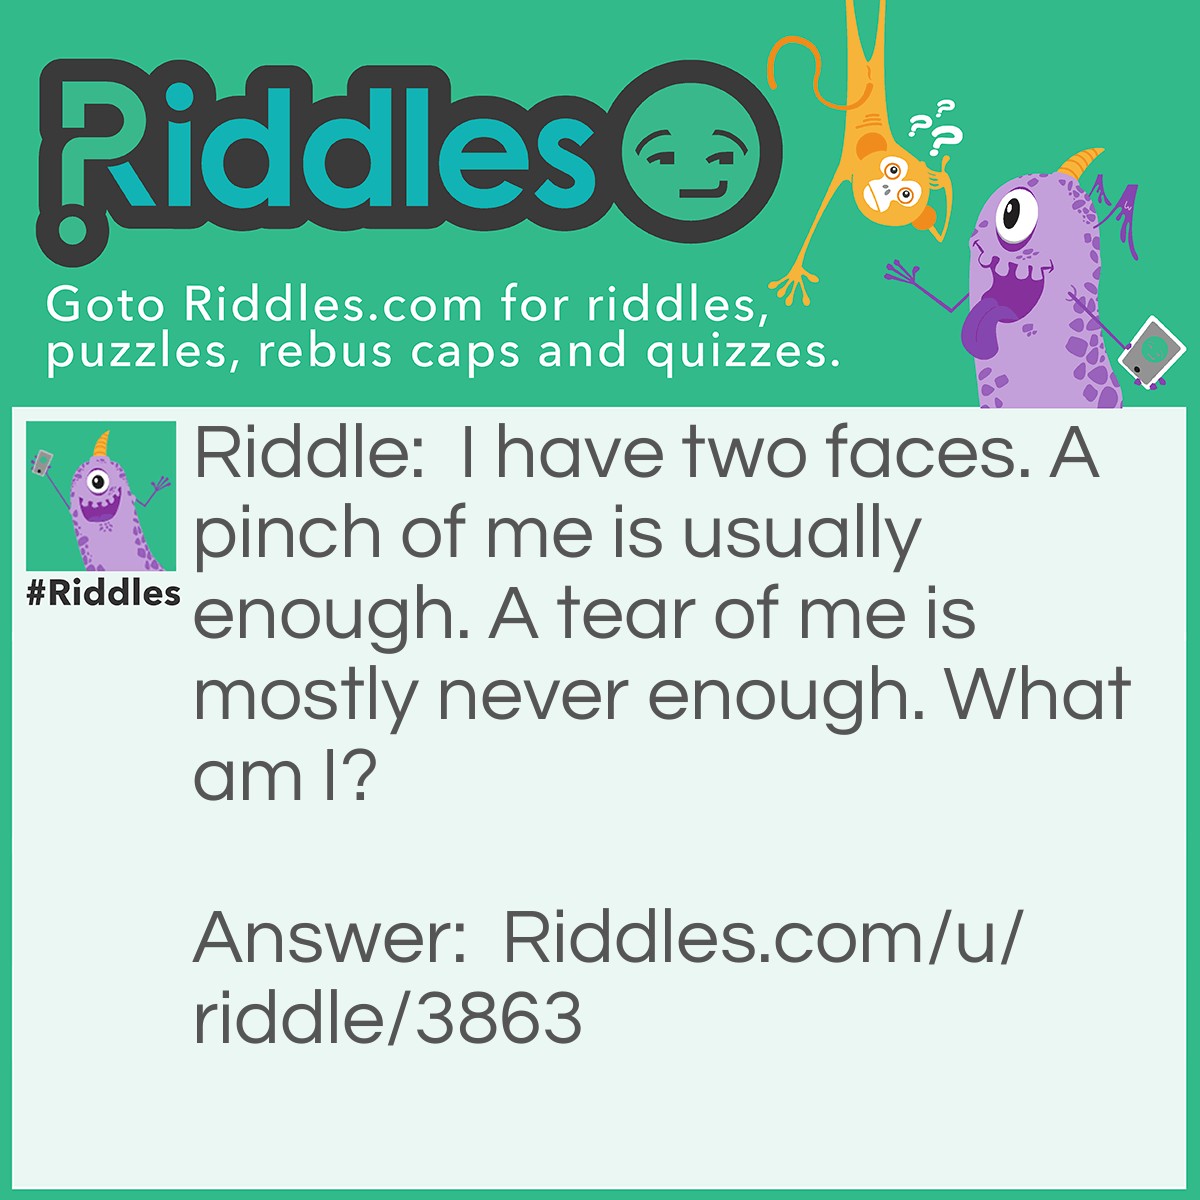 Riddle: I have two faces. A pinch of me is usually enough. A tear of me is mostly never enough. What am I? Answer: Tissue paper.